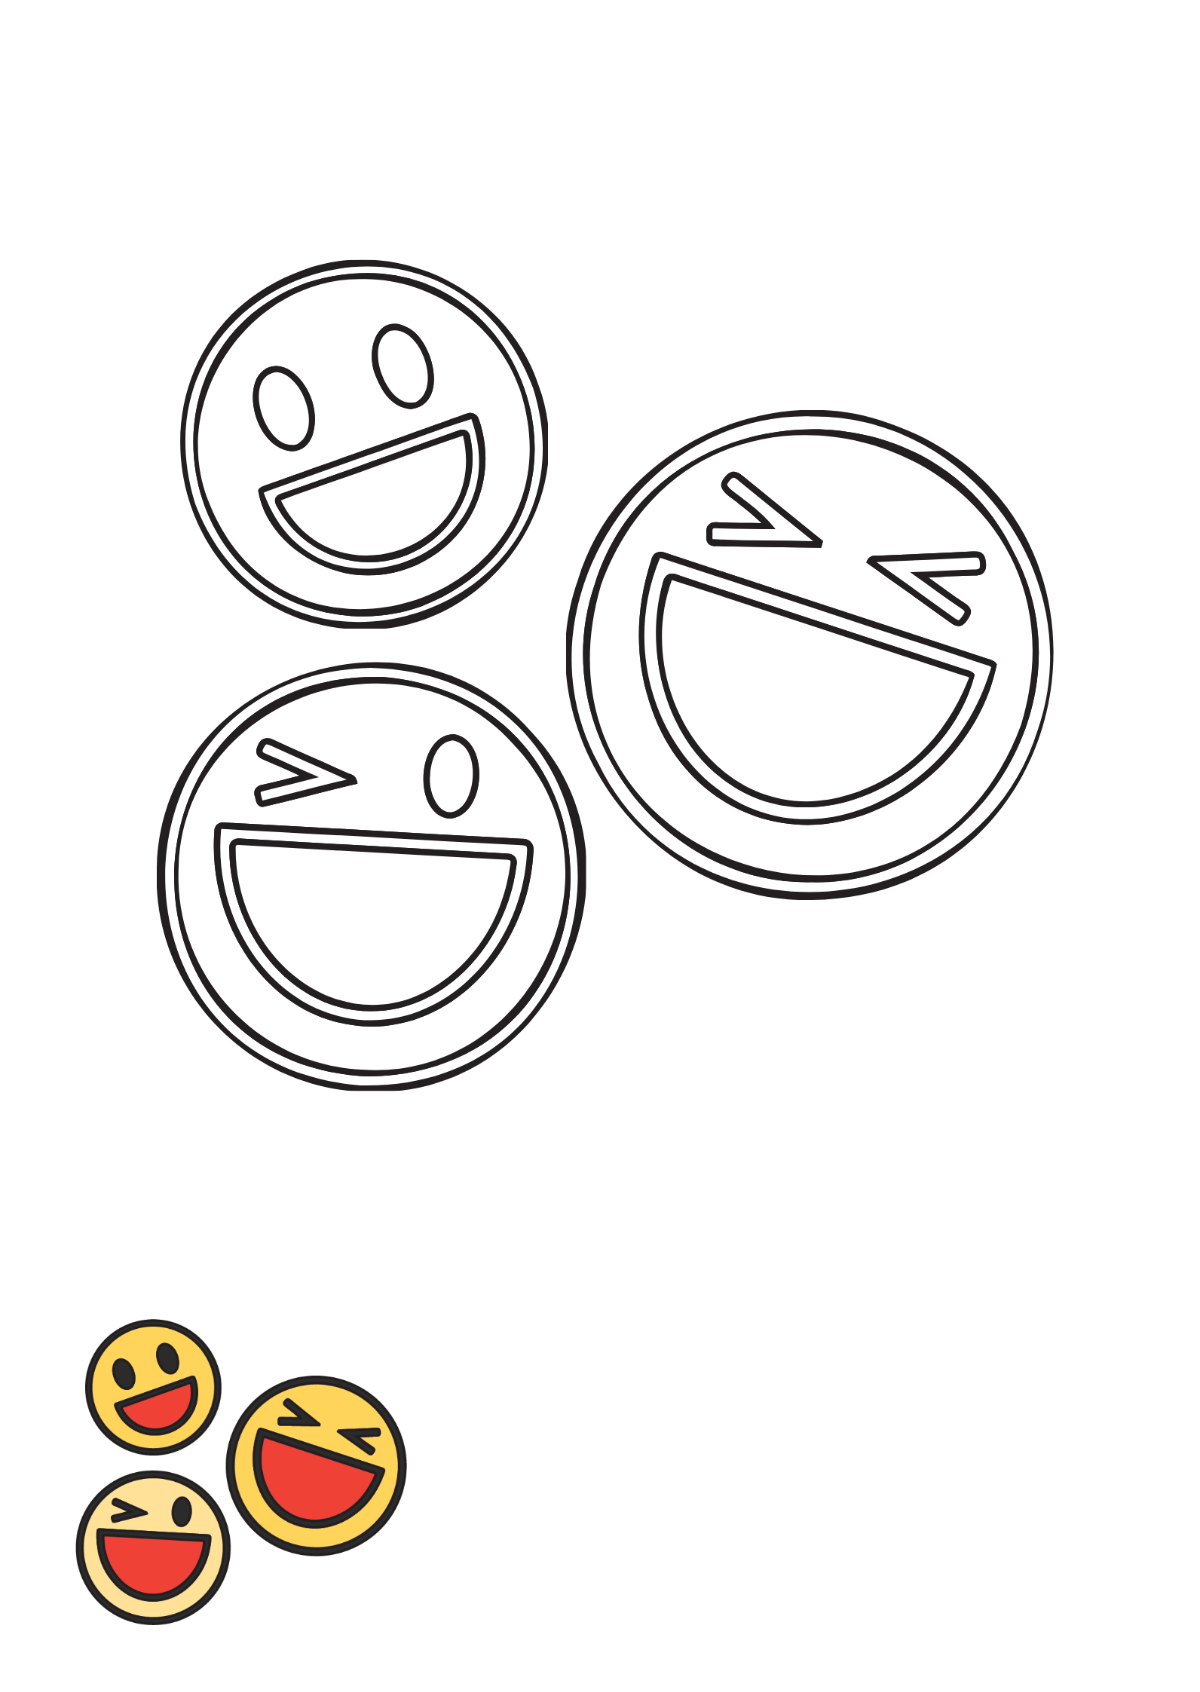 Transparent Smiley coloring page